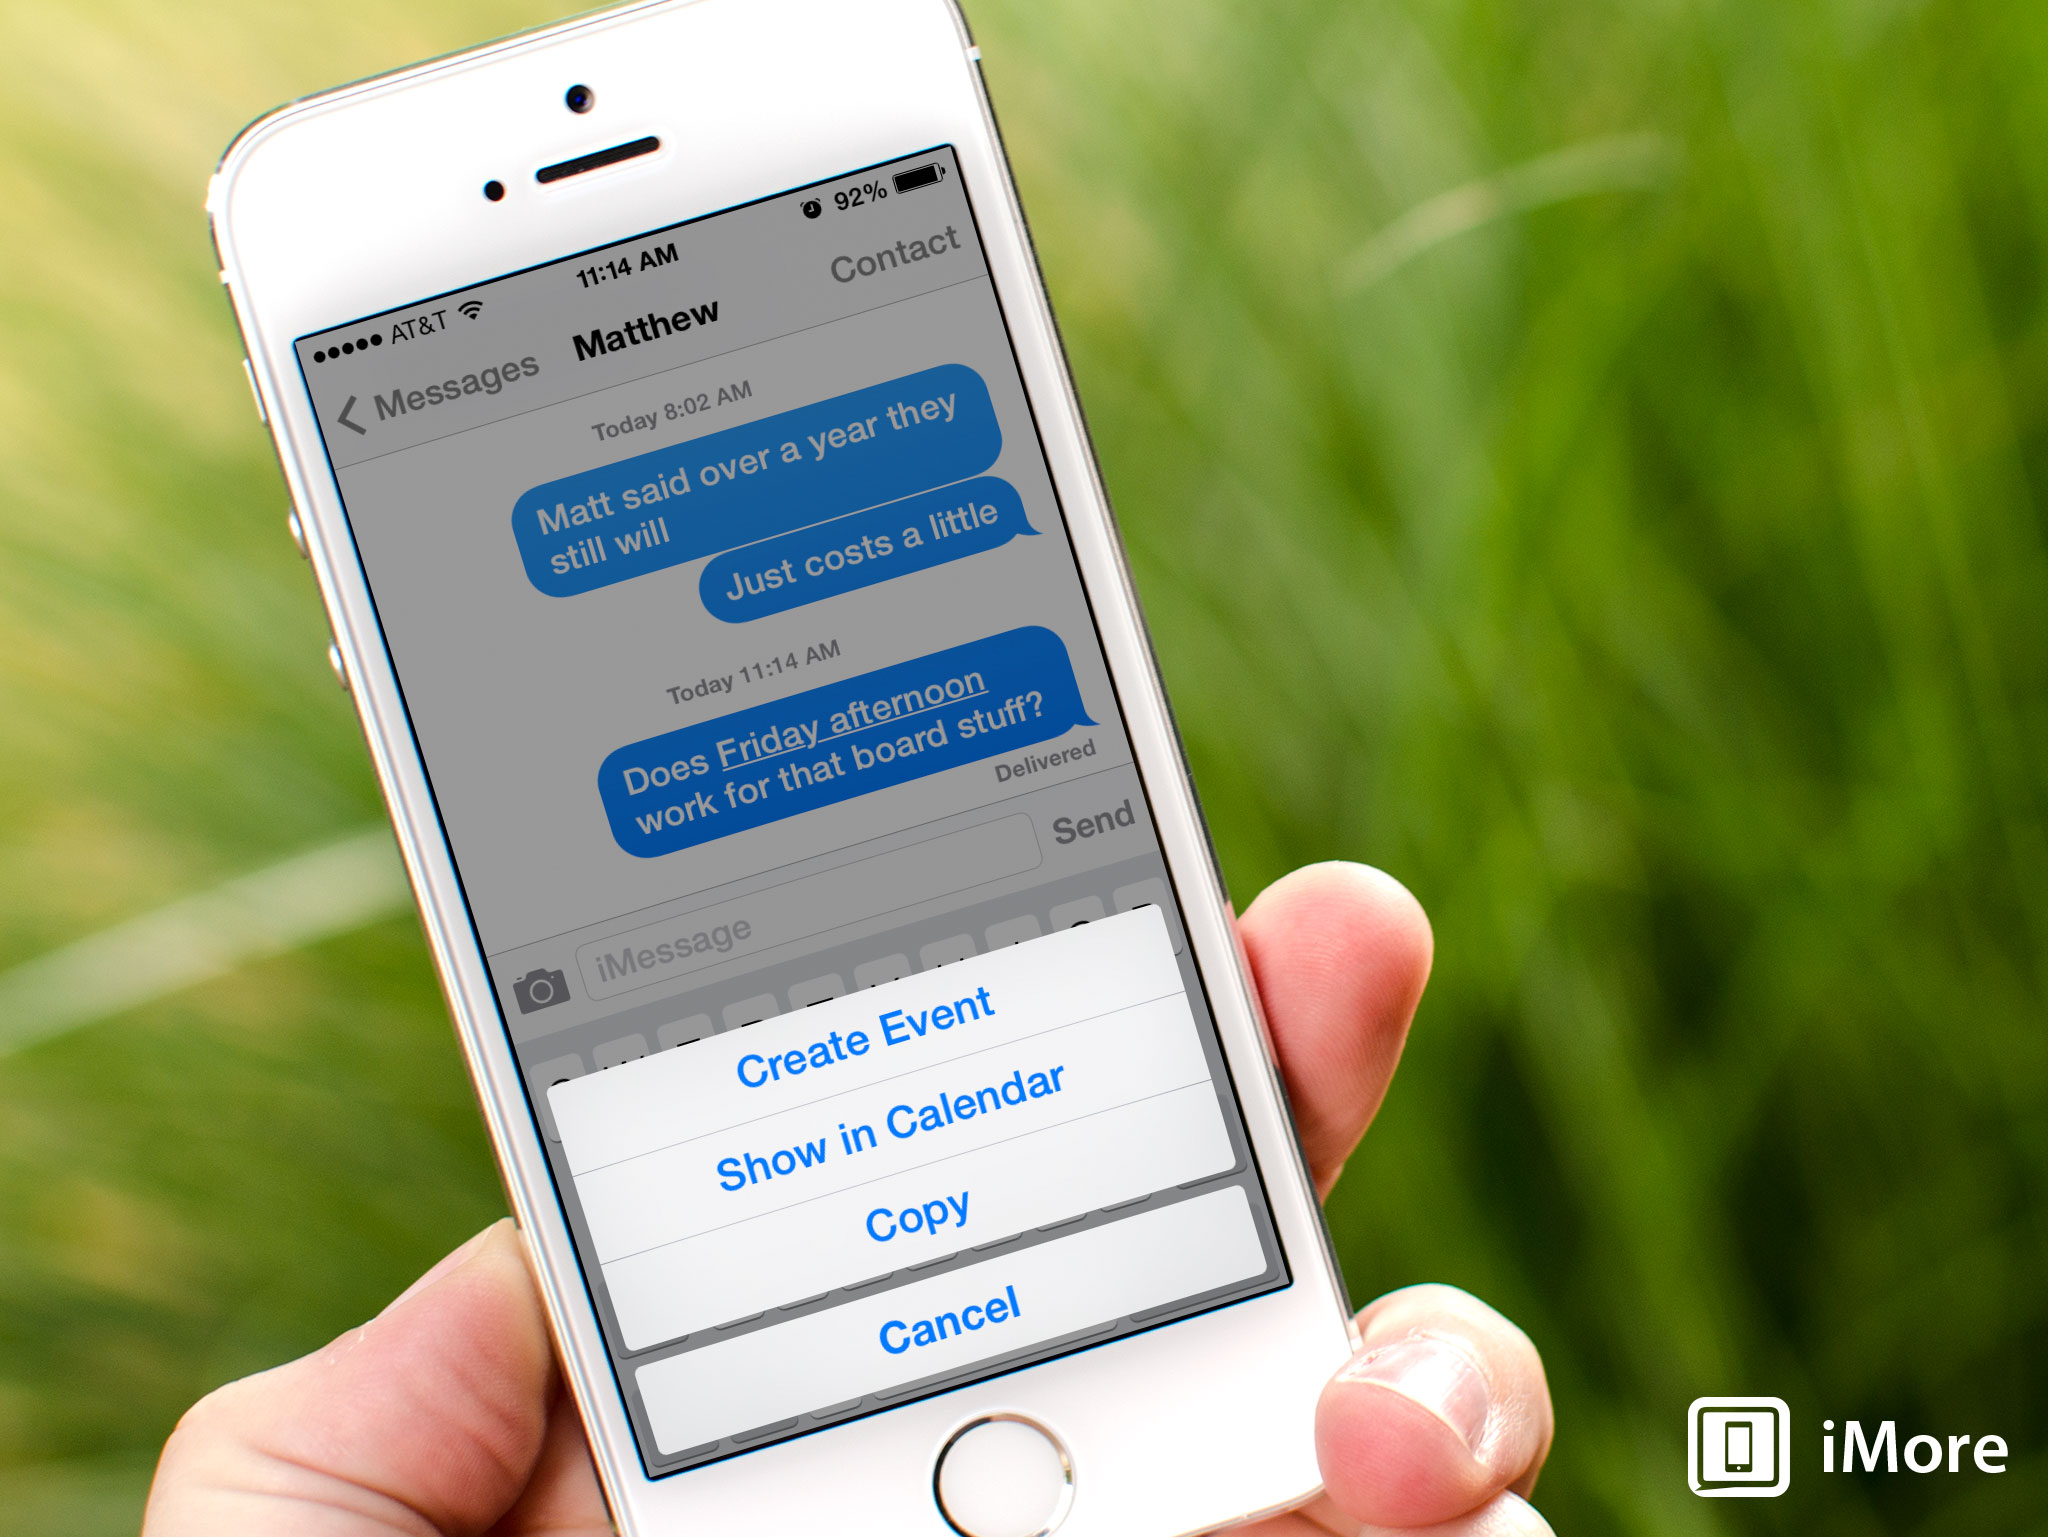 How to create events in iOS directly in the Messages and Mail apps